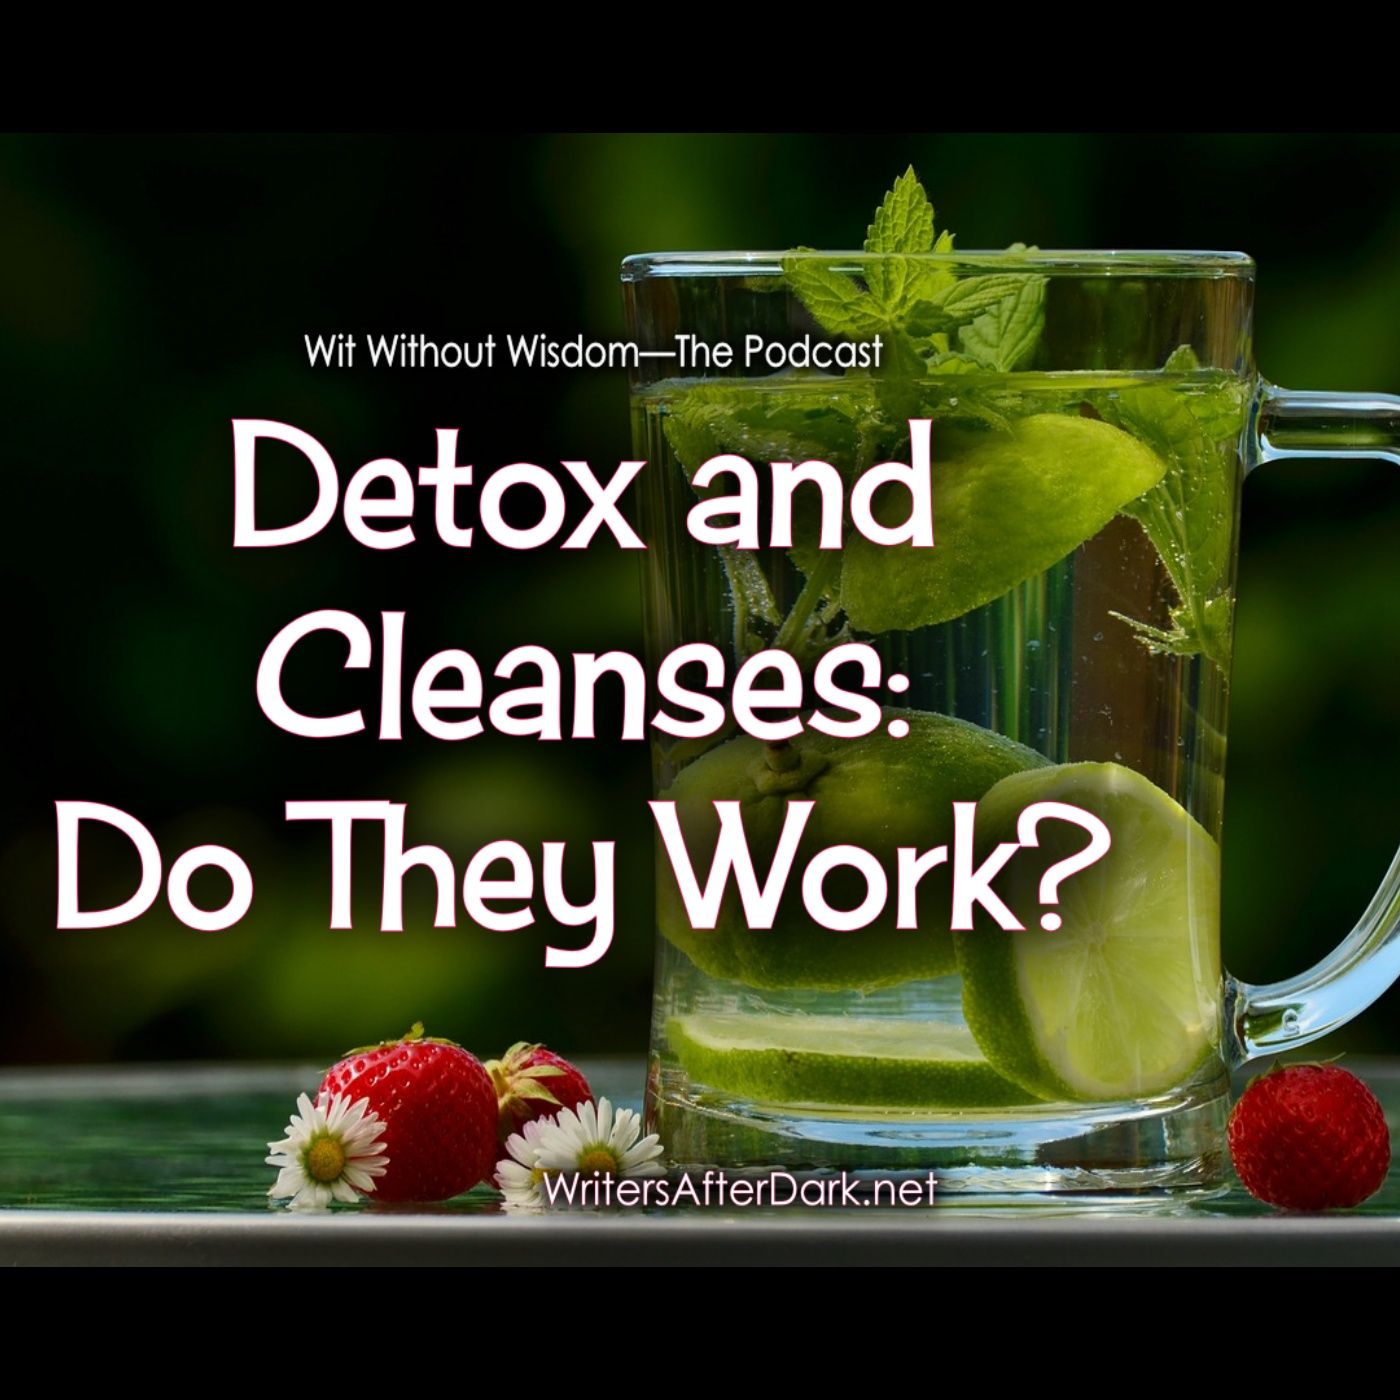 Detox and Cleanses: Do They Work?